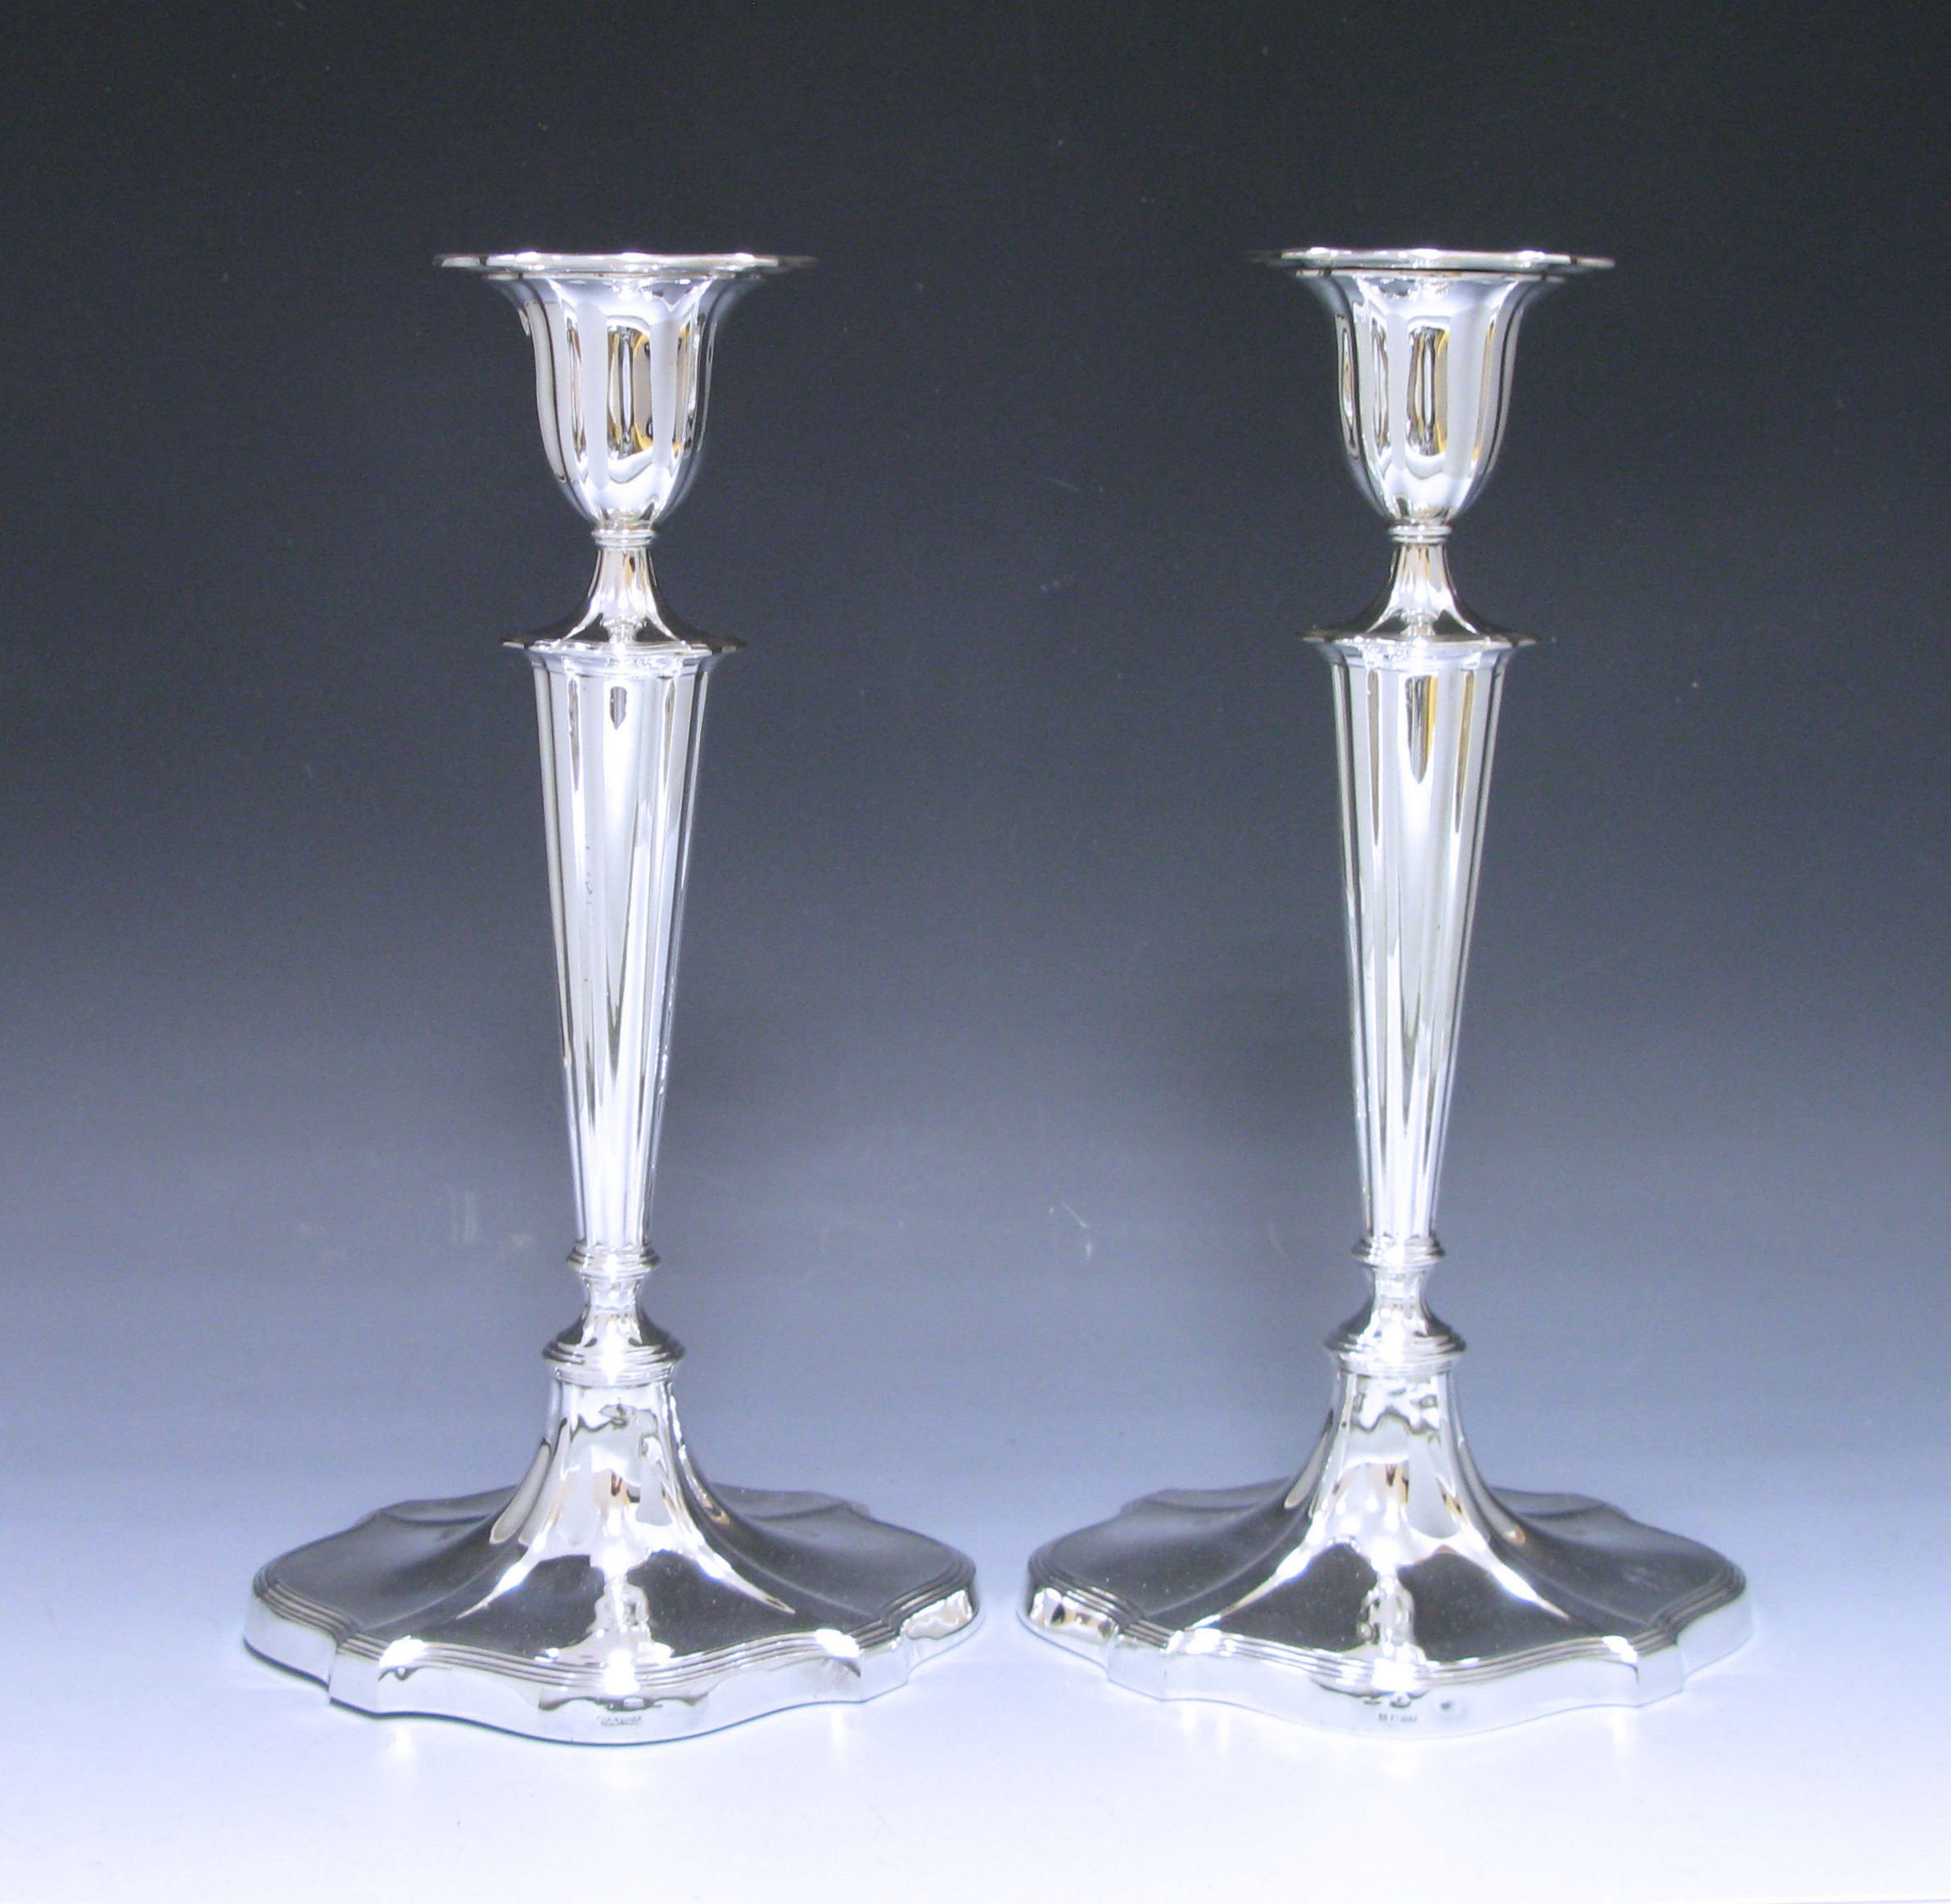 Pair of Victorian Antique Silver Candlesticks 1